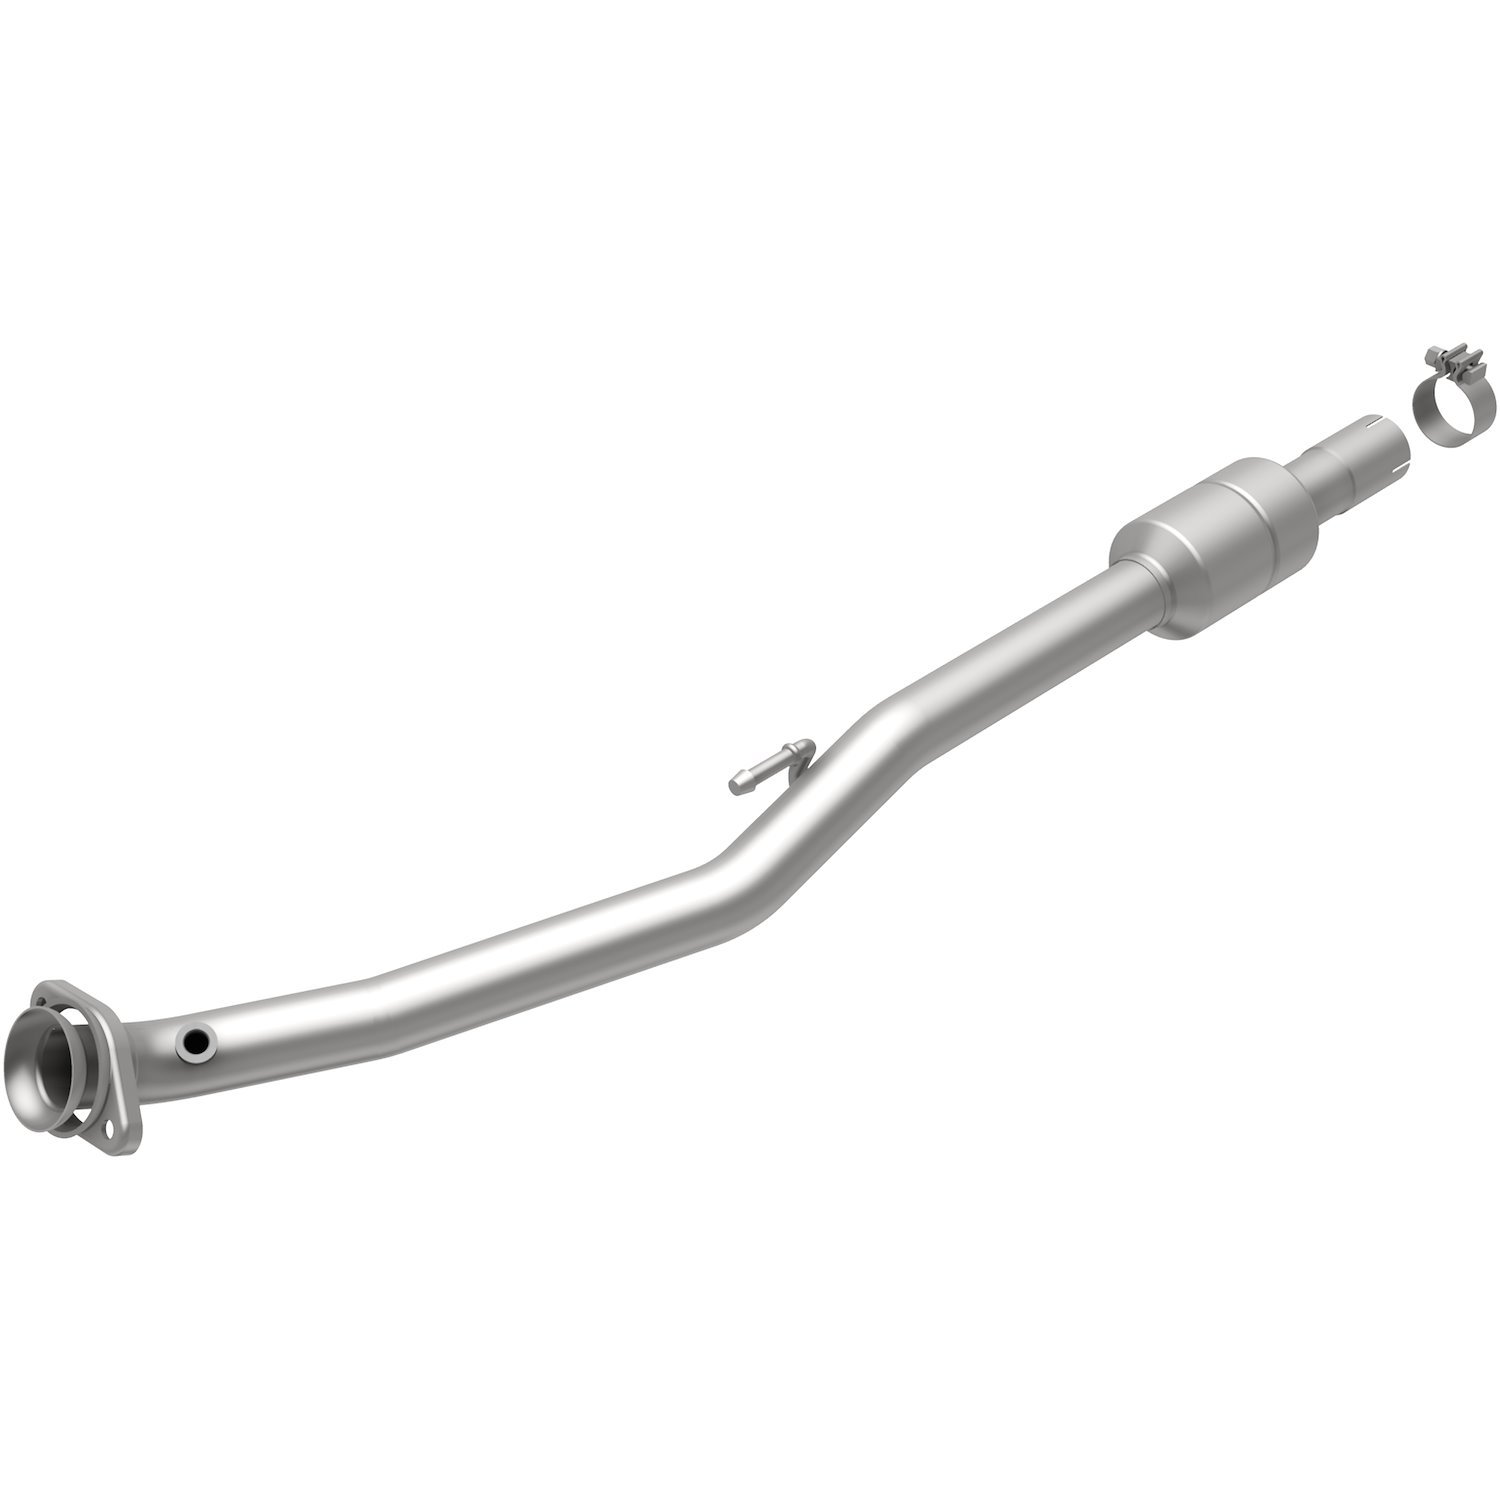 2010-2014 Cadillac CTS California Grade CARB Compliant Direct-Fit Catalytic Converter